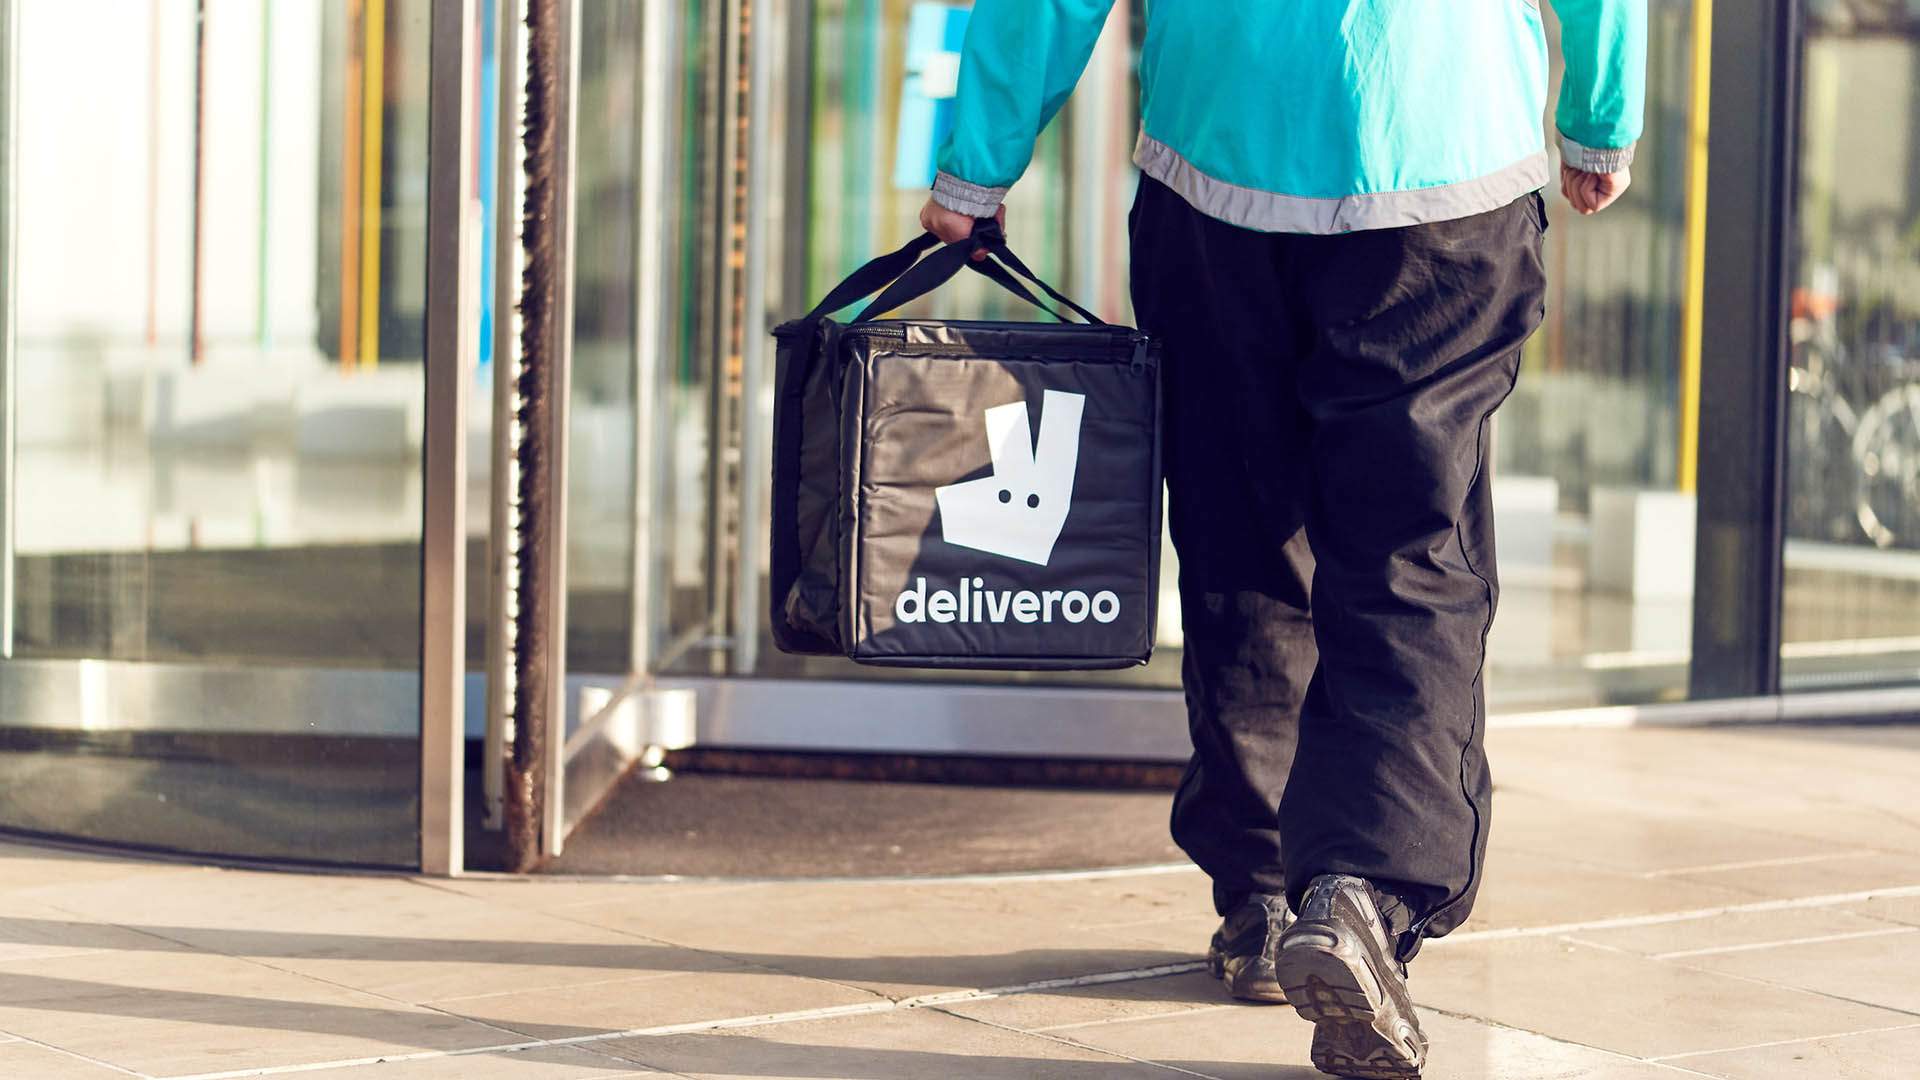 Deliveroo Will Now Bring Kitchen and Household Products to Your Door